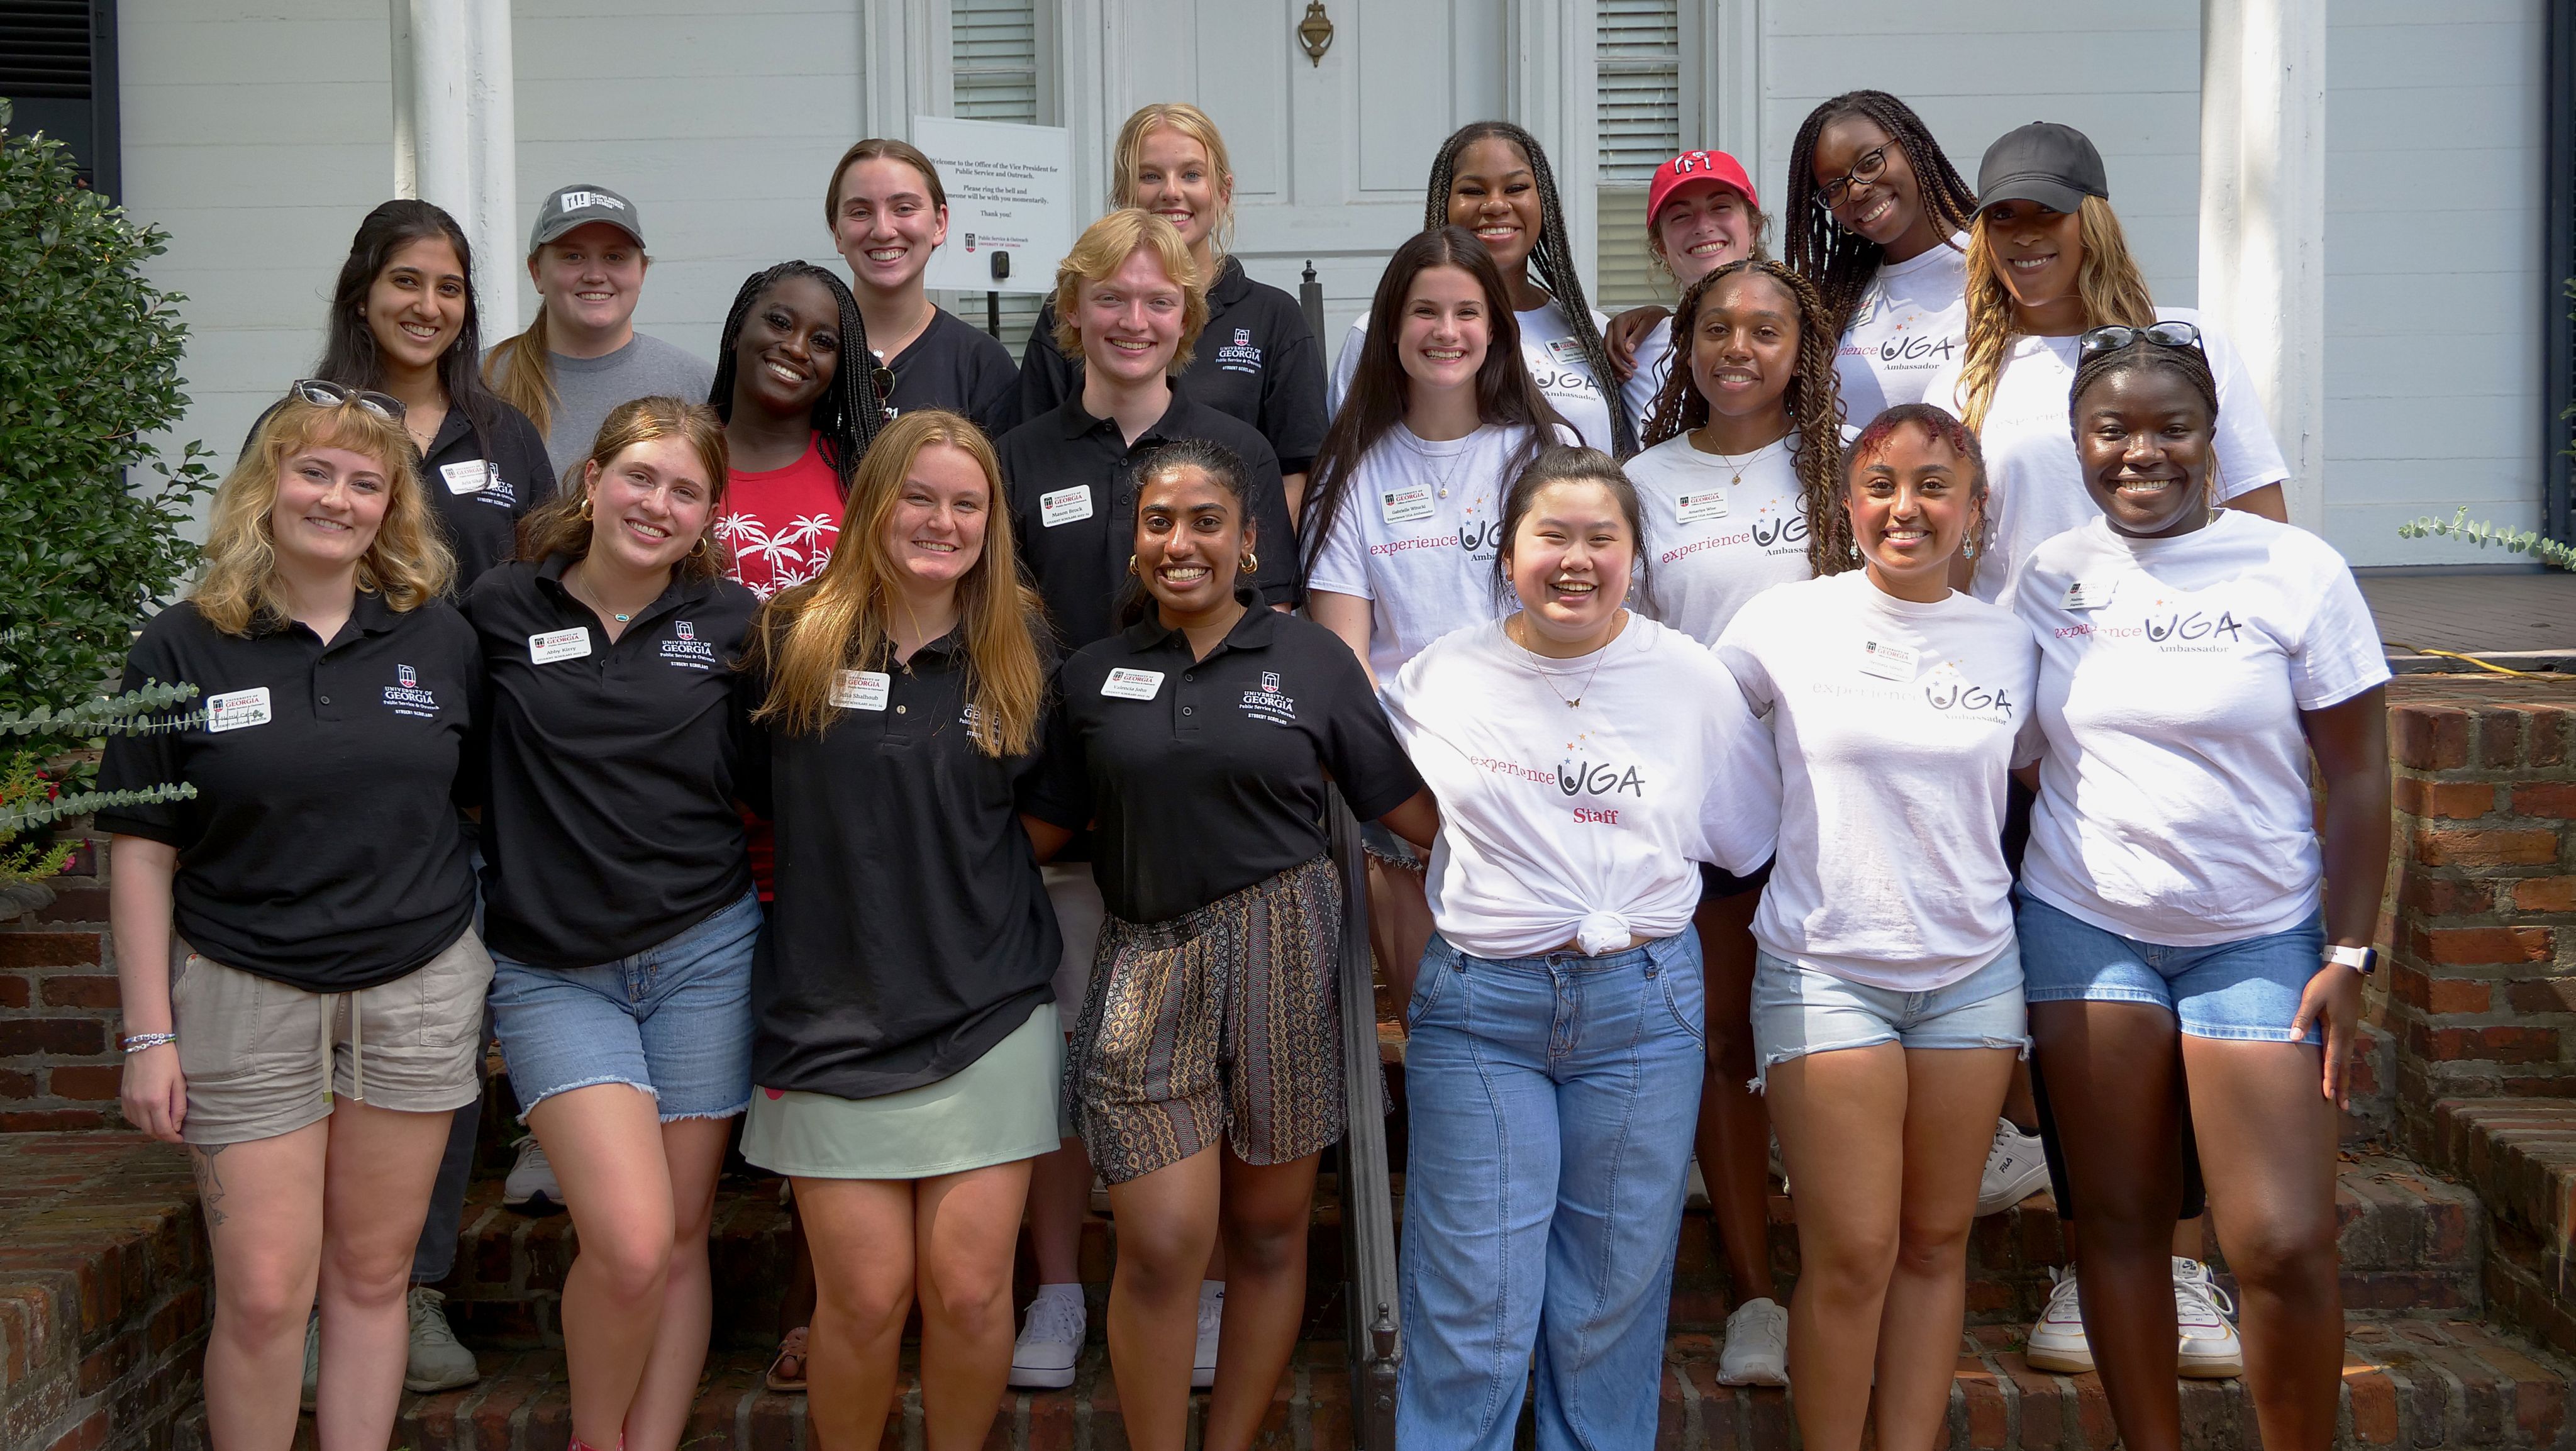 Student ambassadors with Experience UGA, Campus Kitchen, PSO Student Scholars and AmeriCorps pose for a photo.